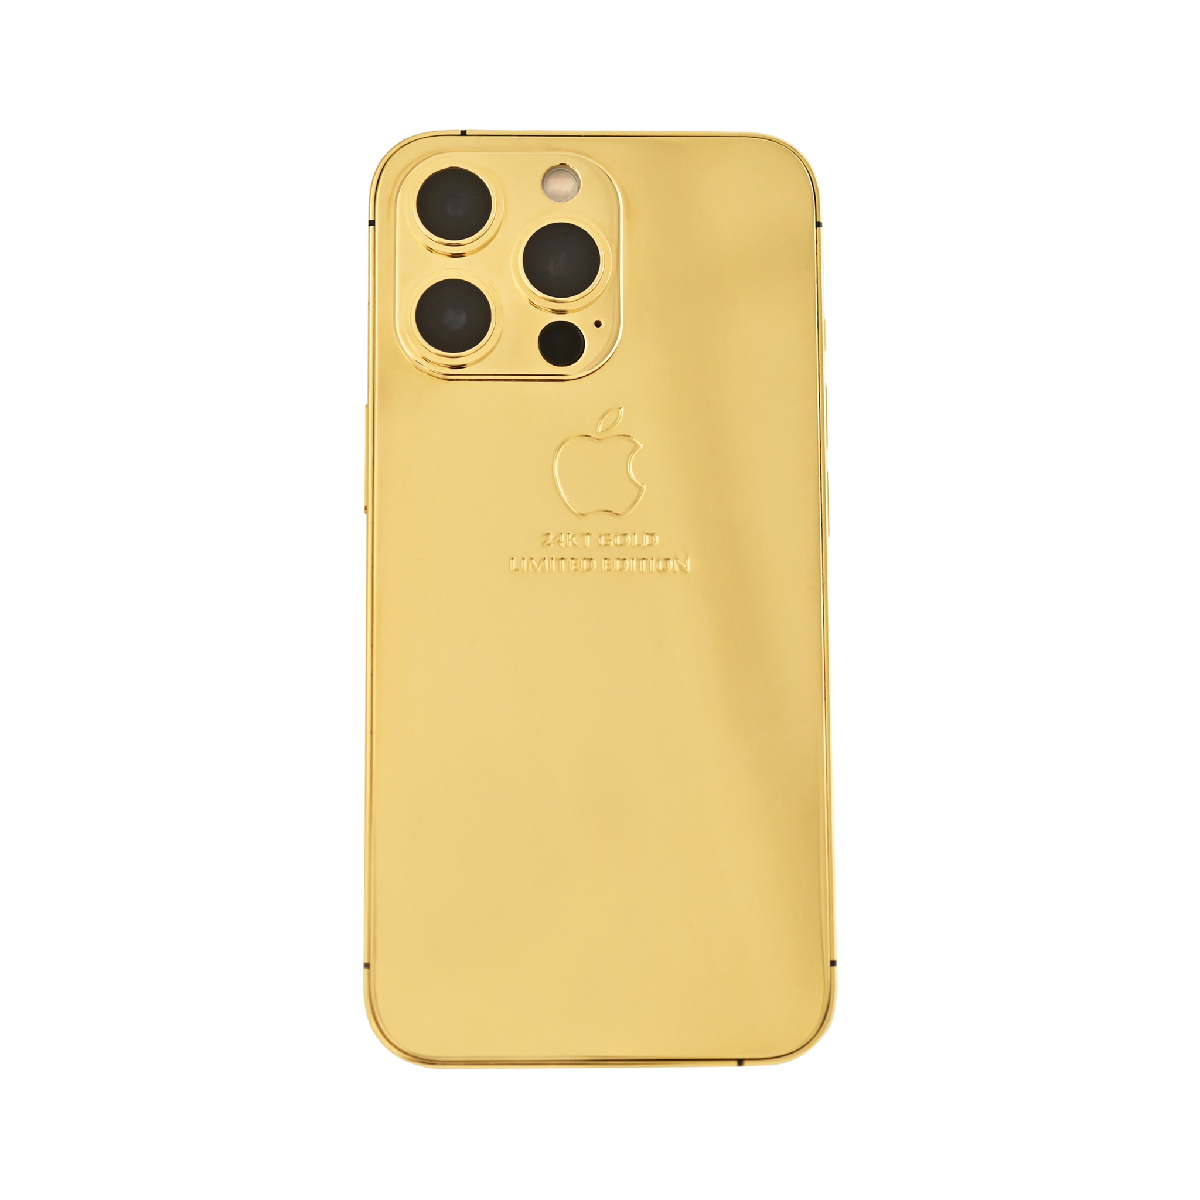 Caviar Luxury 24k Full Gold Customized iPhone 14 Pro Max 128 GB Limited Edition